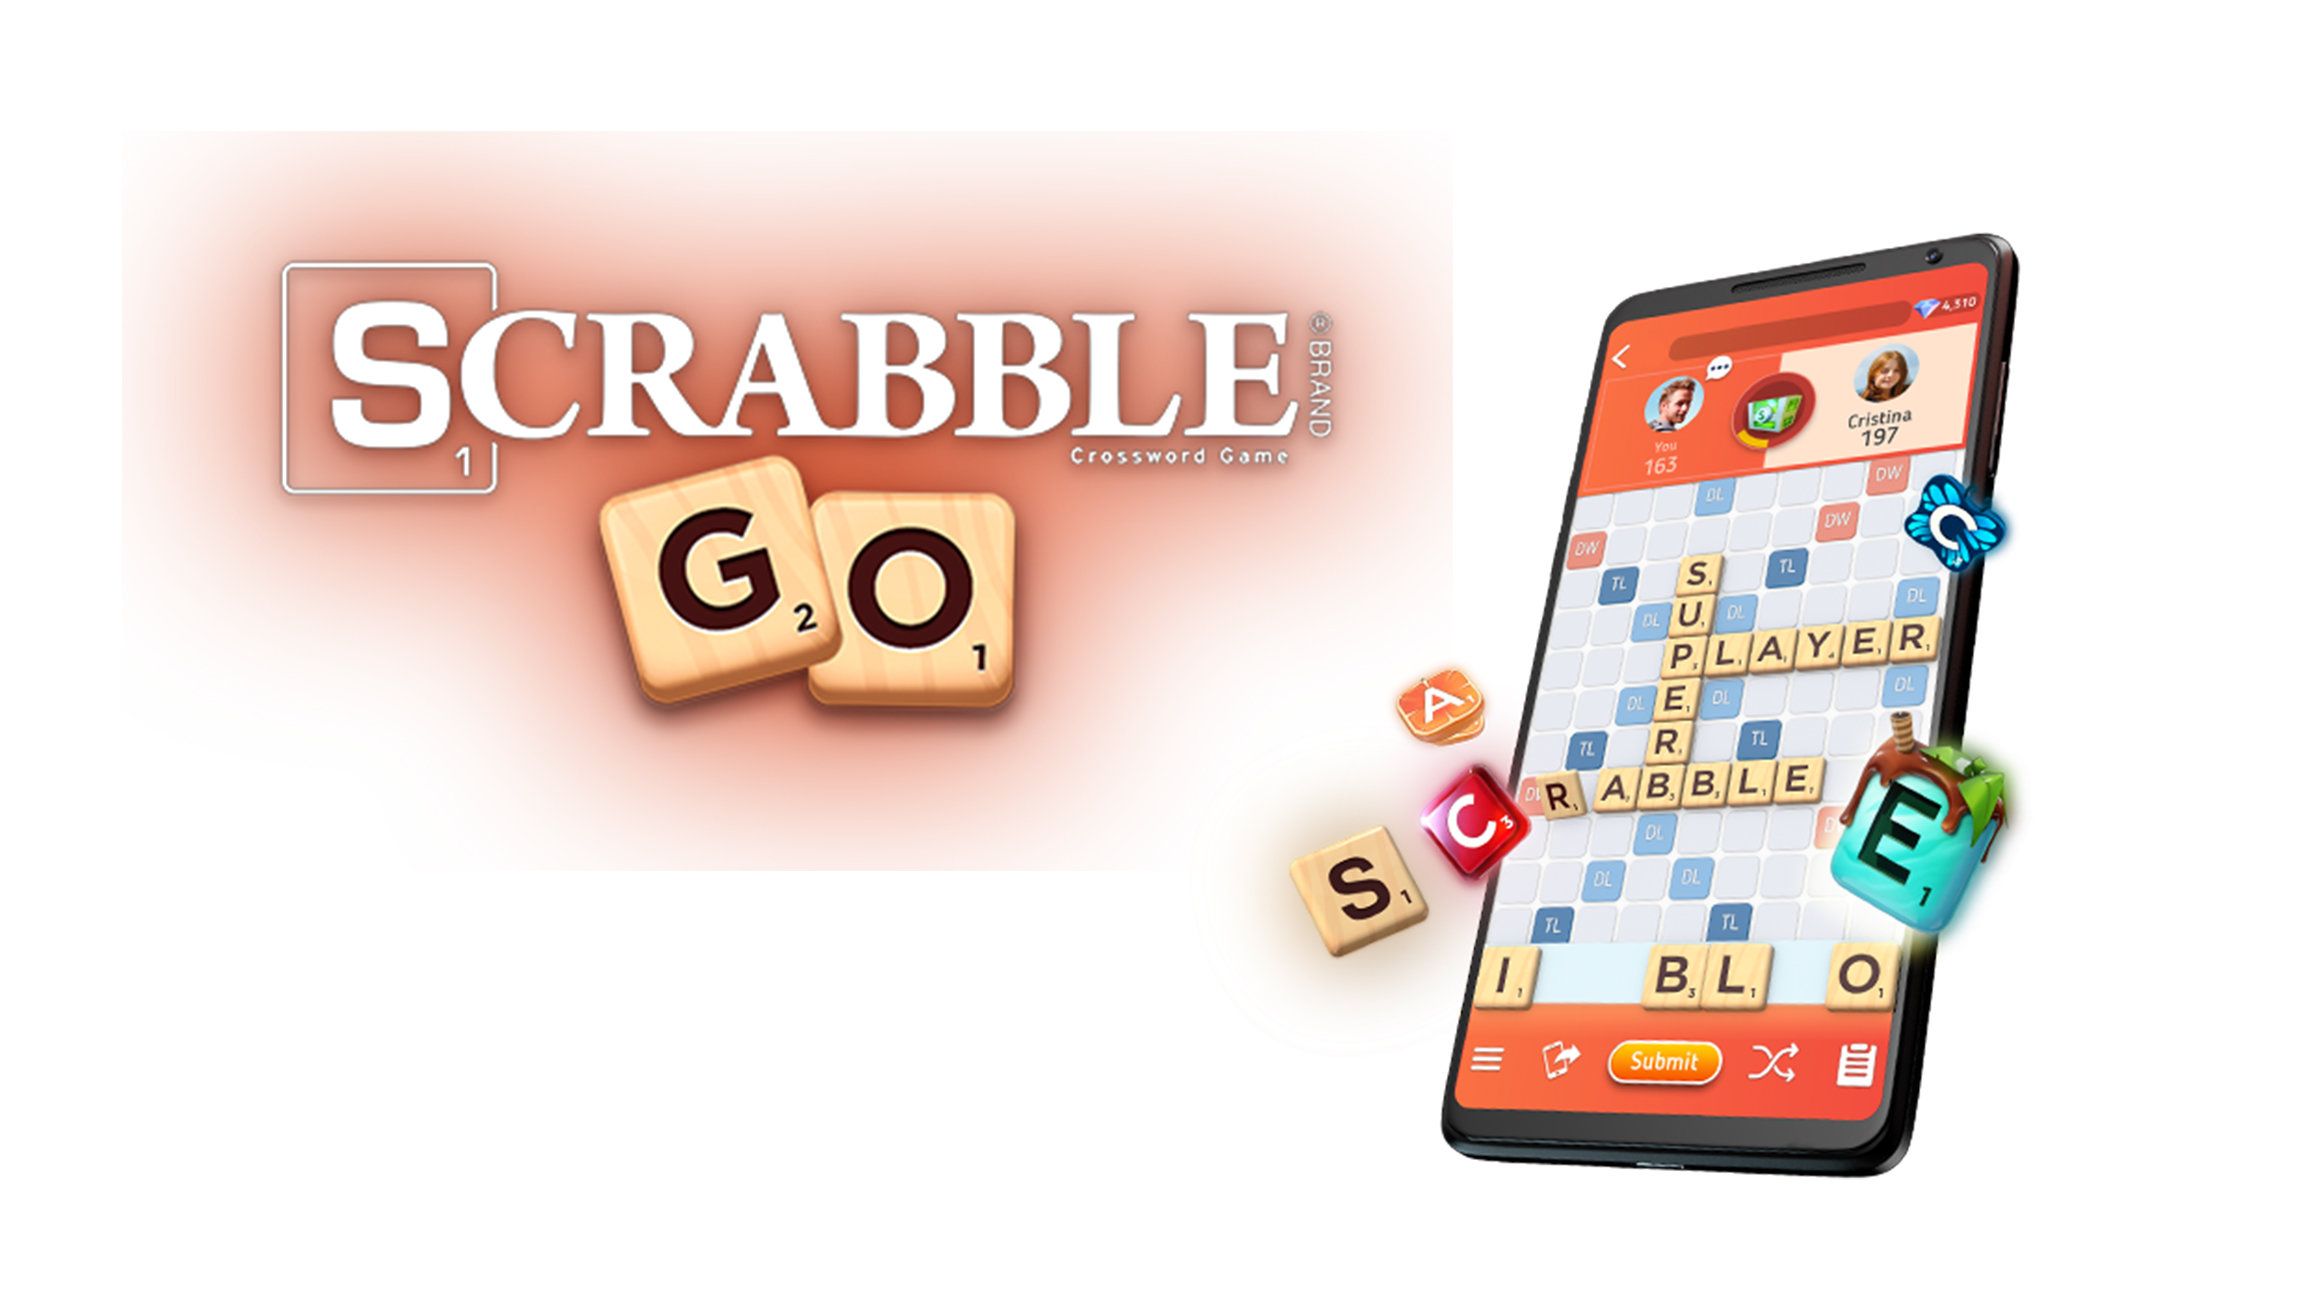 Scrabble Go app for smartphones and tablets